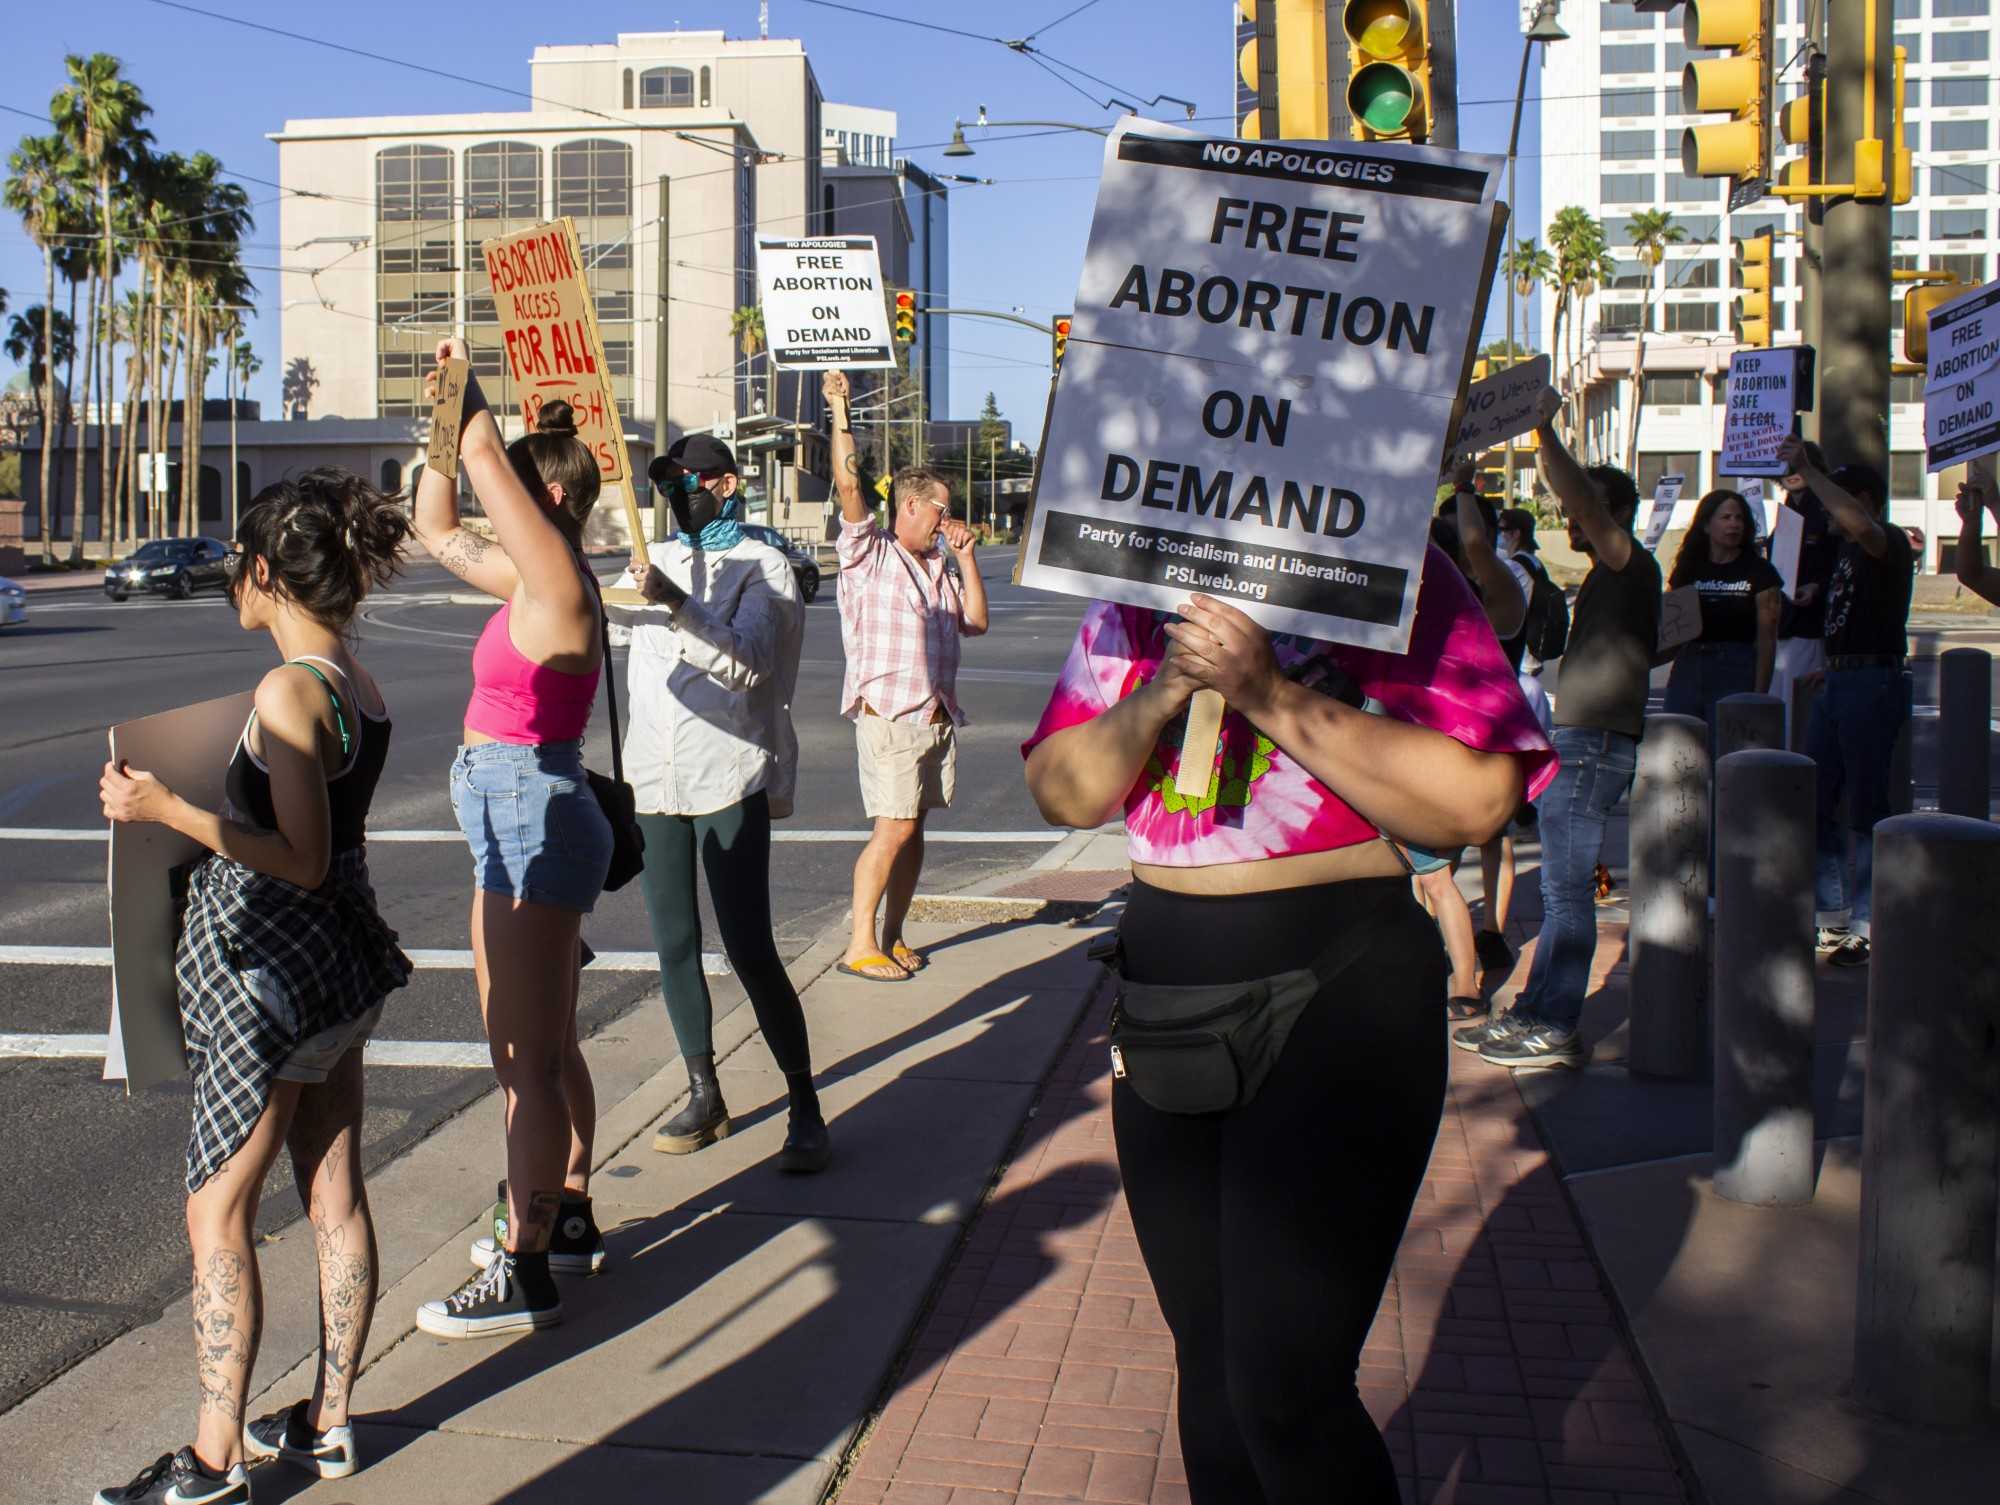 After a Tuesday, May 3, Pro-choice peace rally, more protesters gathered at the steps of the Tucson Courthouse Sunday, May 8. The protesters ask for abortion to stay legal as the Supreme Court leaked draft decision to overturn Roe v. Wade.